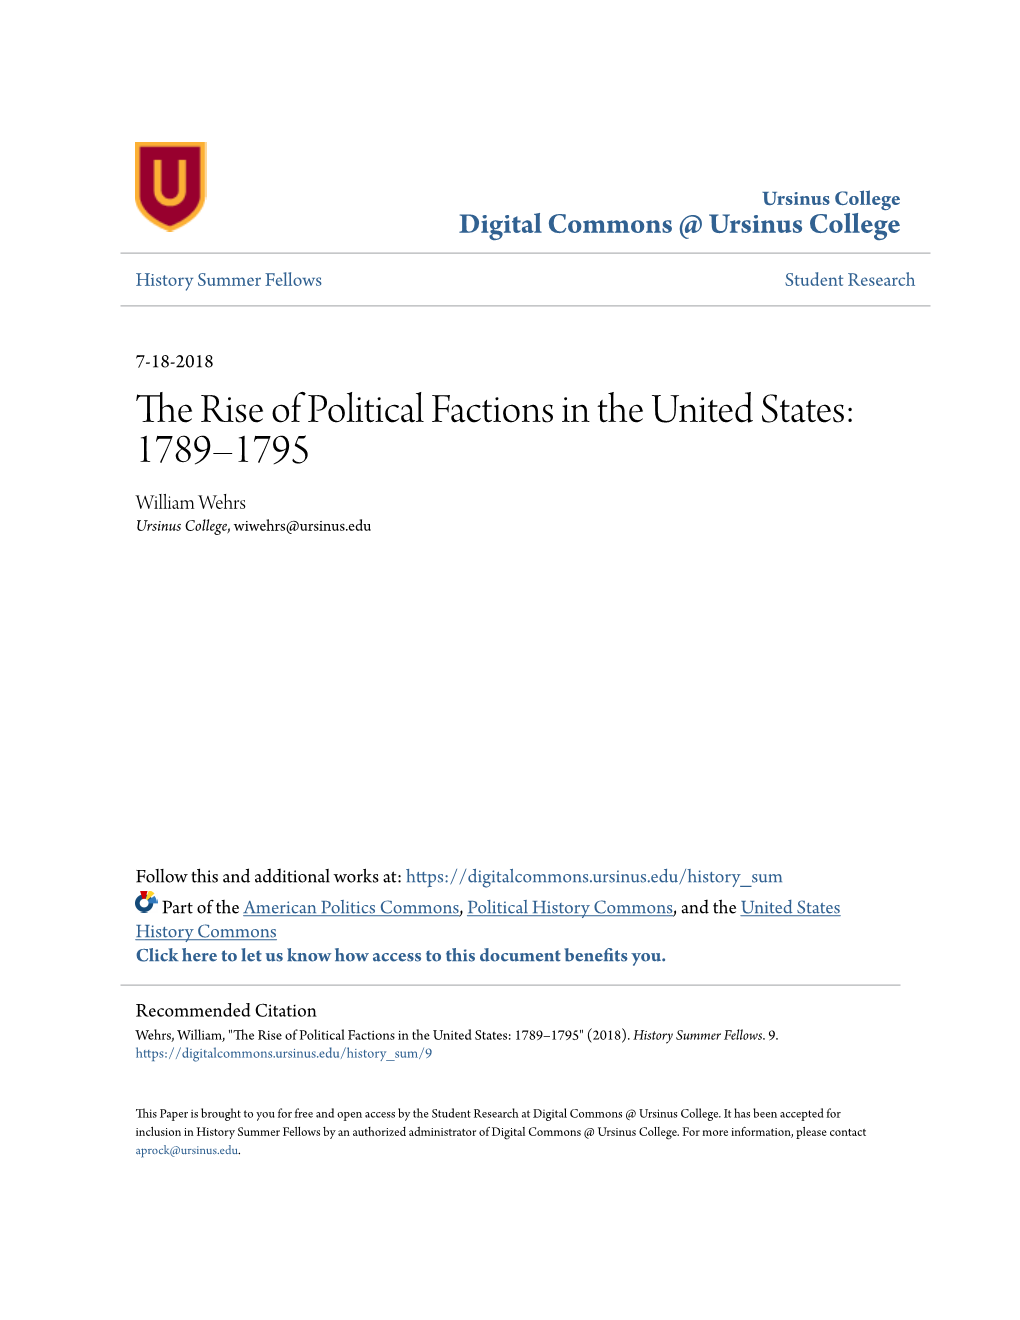 The Rise of Political Factions in the United States: 1789–1795 William Wehrs Ursinus College, Wiwehrs@Ursinus.Edu